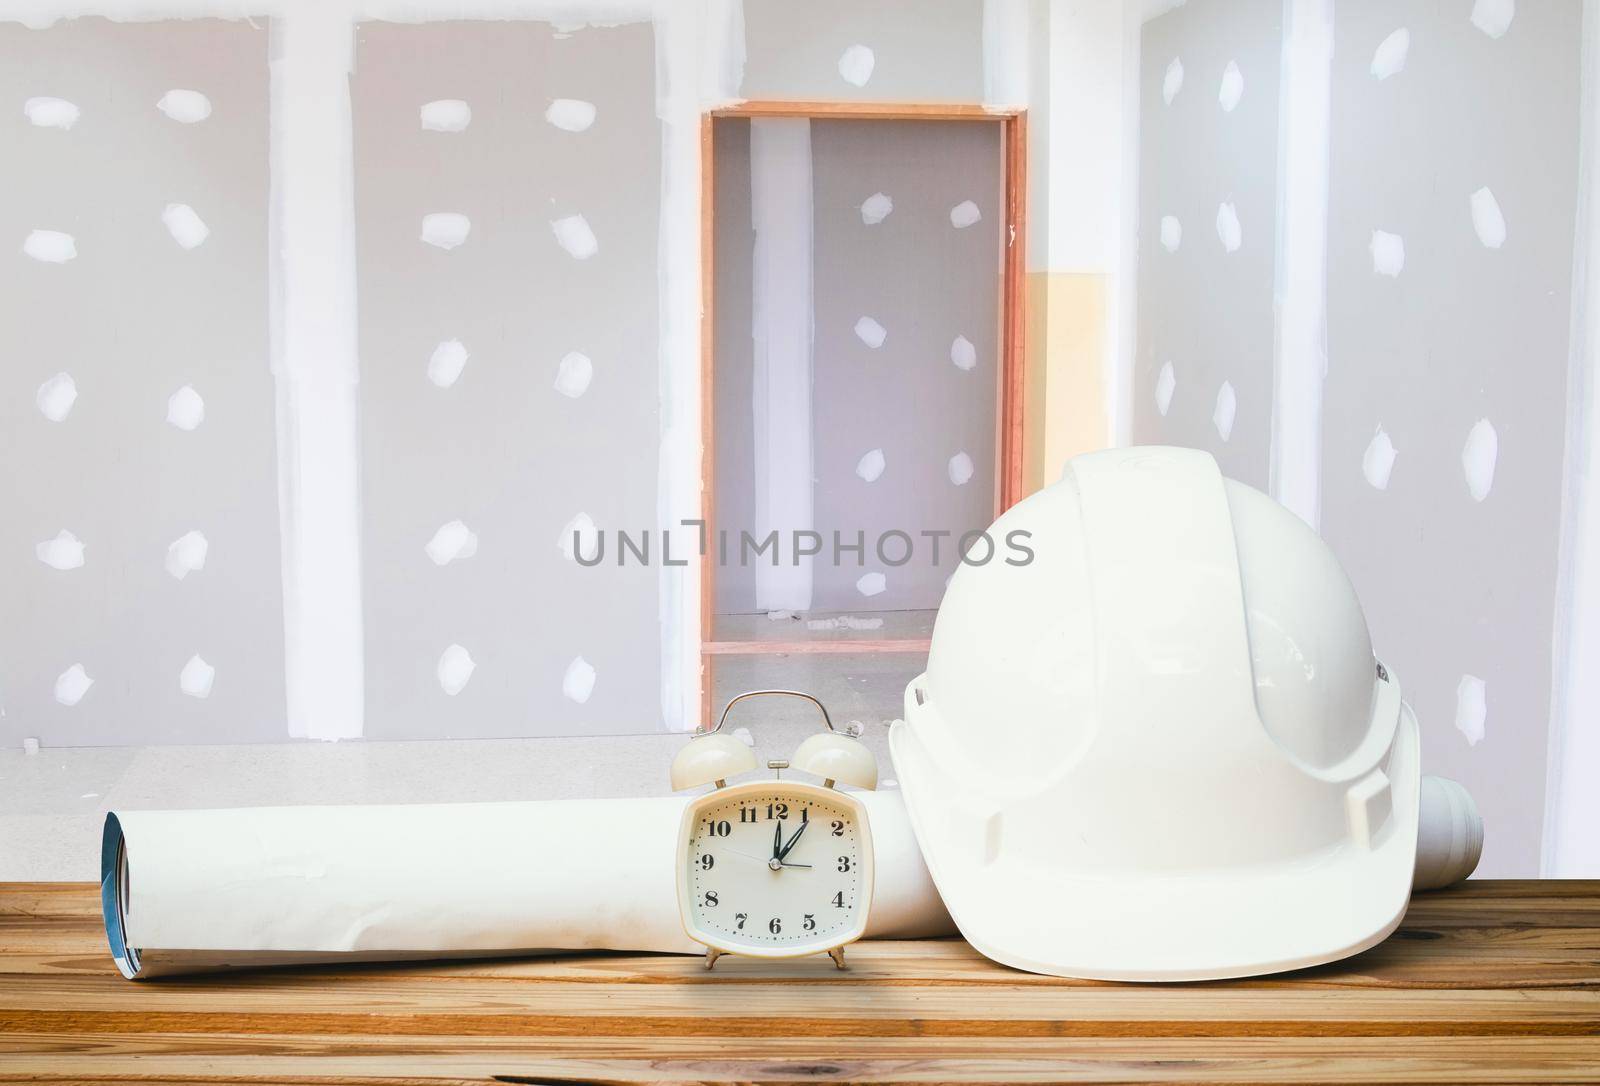 white safety helmet plastic, paper roll plan blueprint alarm clock time a rest at noon on wood floor table and gypsum board wall remodel interior with copy space add text